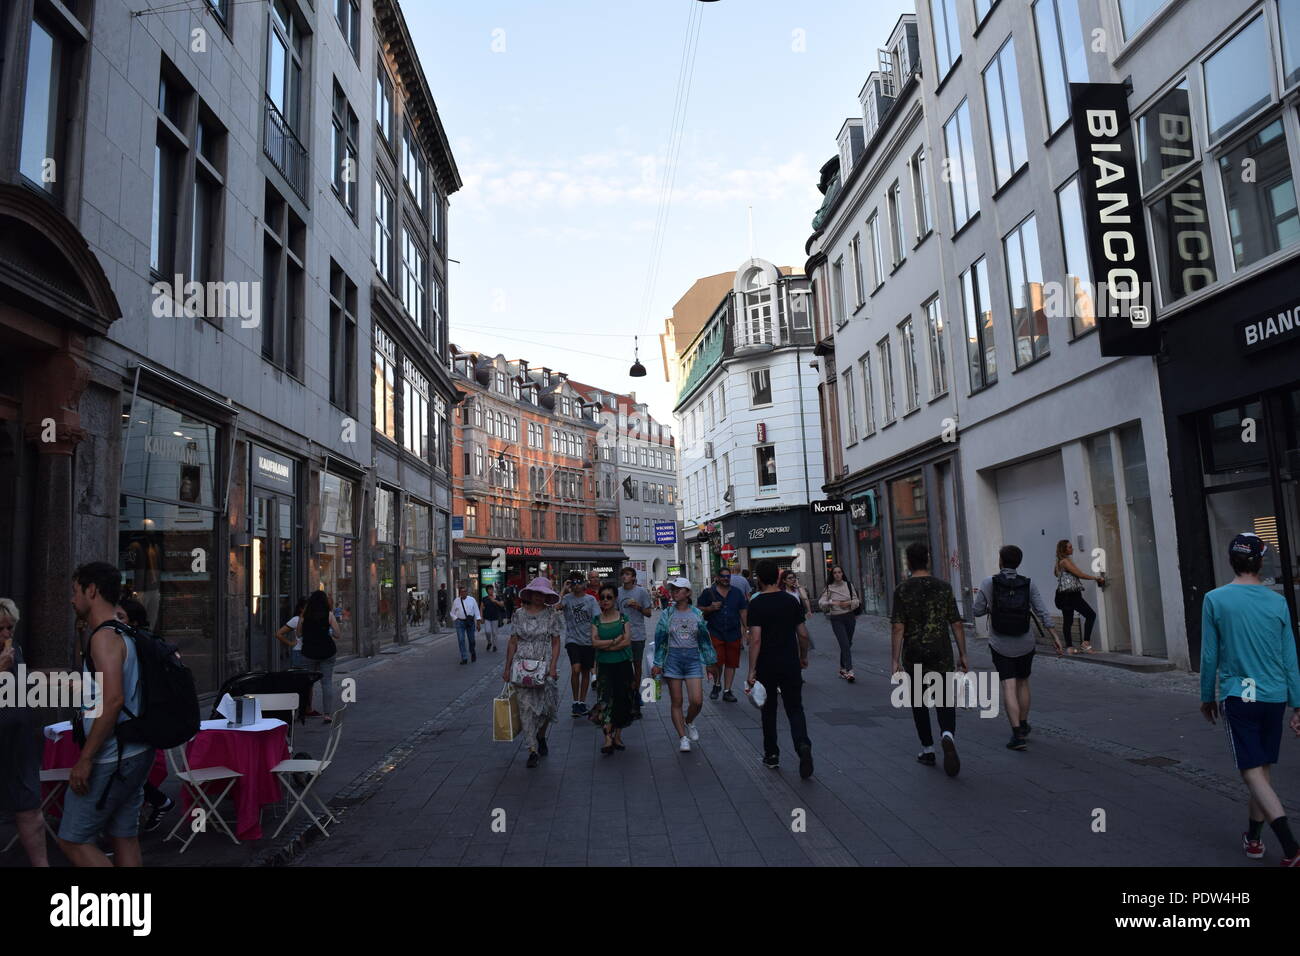 Danish Pedestrian High Resolution Stock Photography and Images Alamy